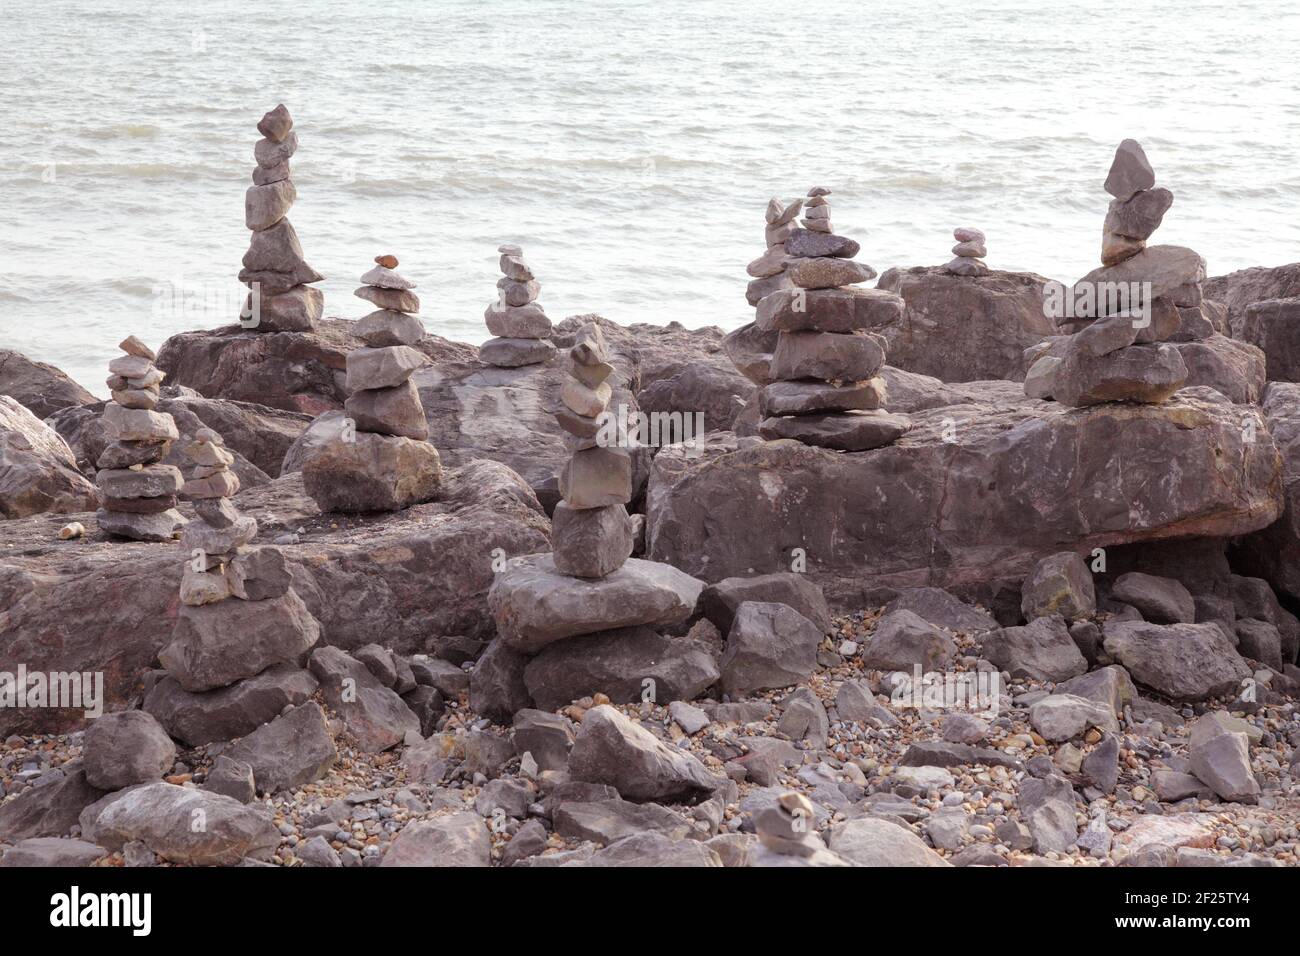 Stacks of balancing stones or balanced rocks to make rock or stone cairns. Stacked or piled on beach shoreline with sea behind. Stock Photo